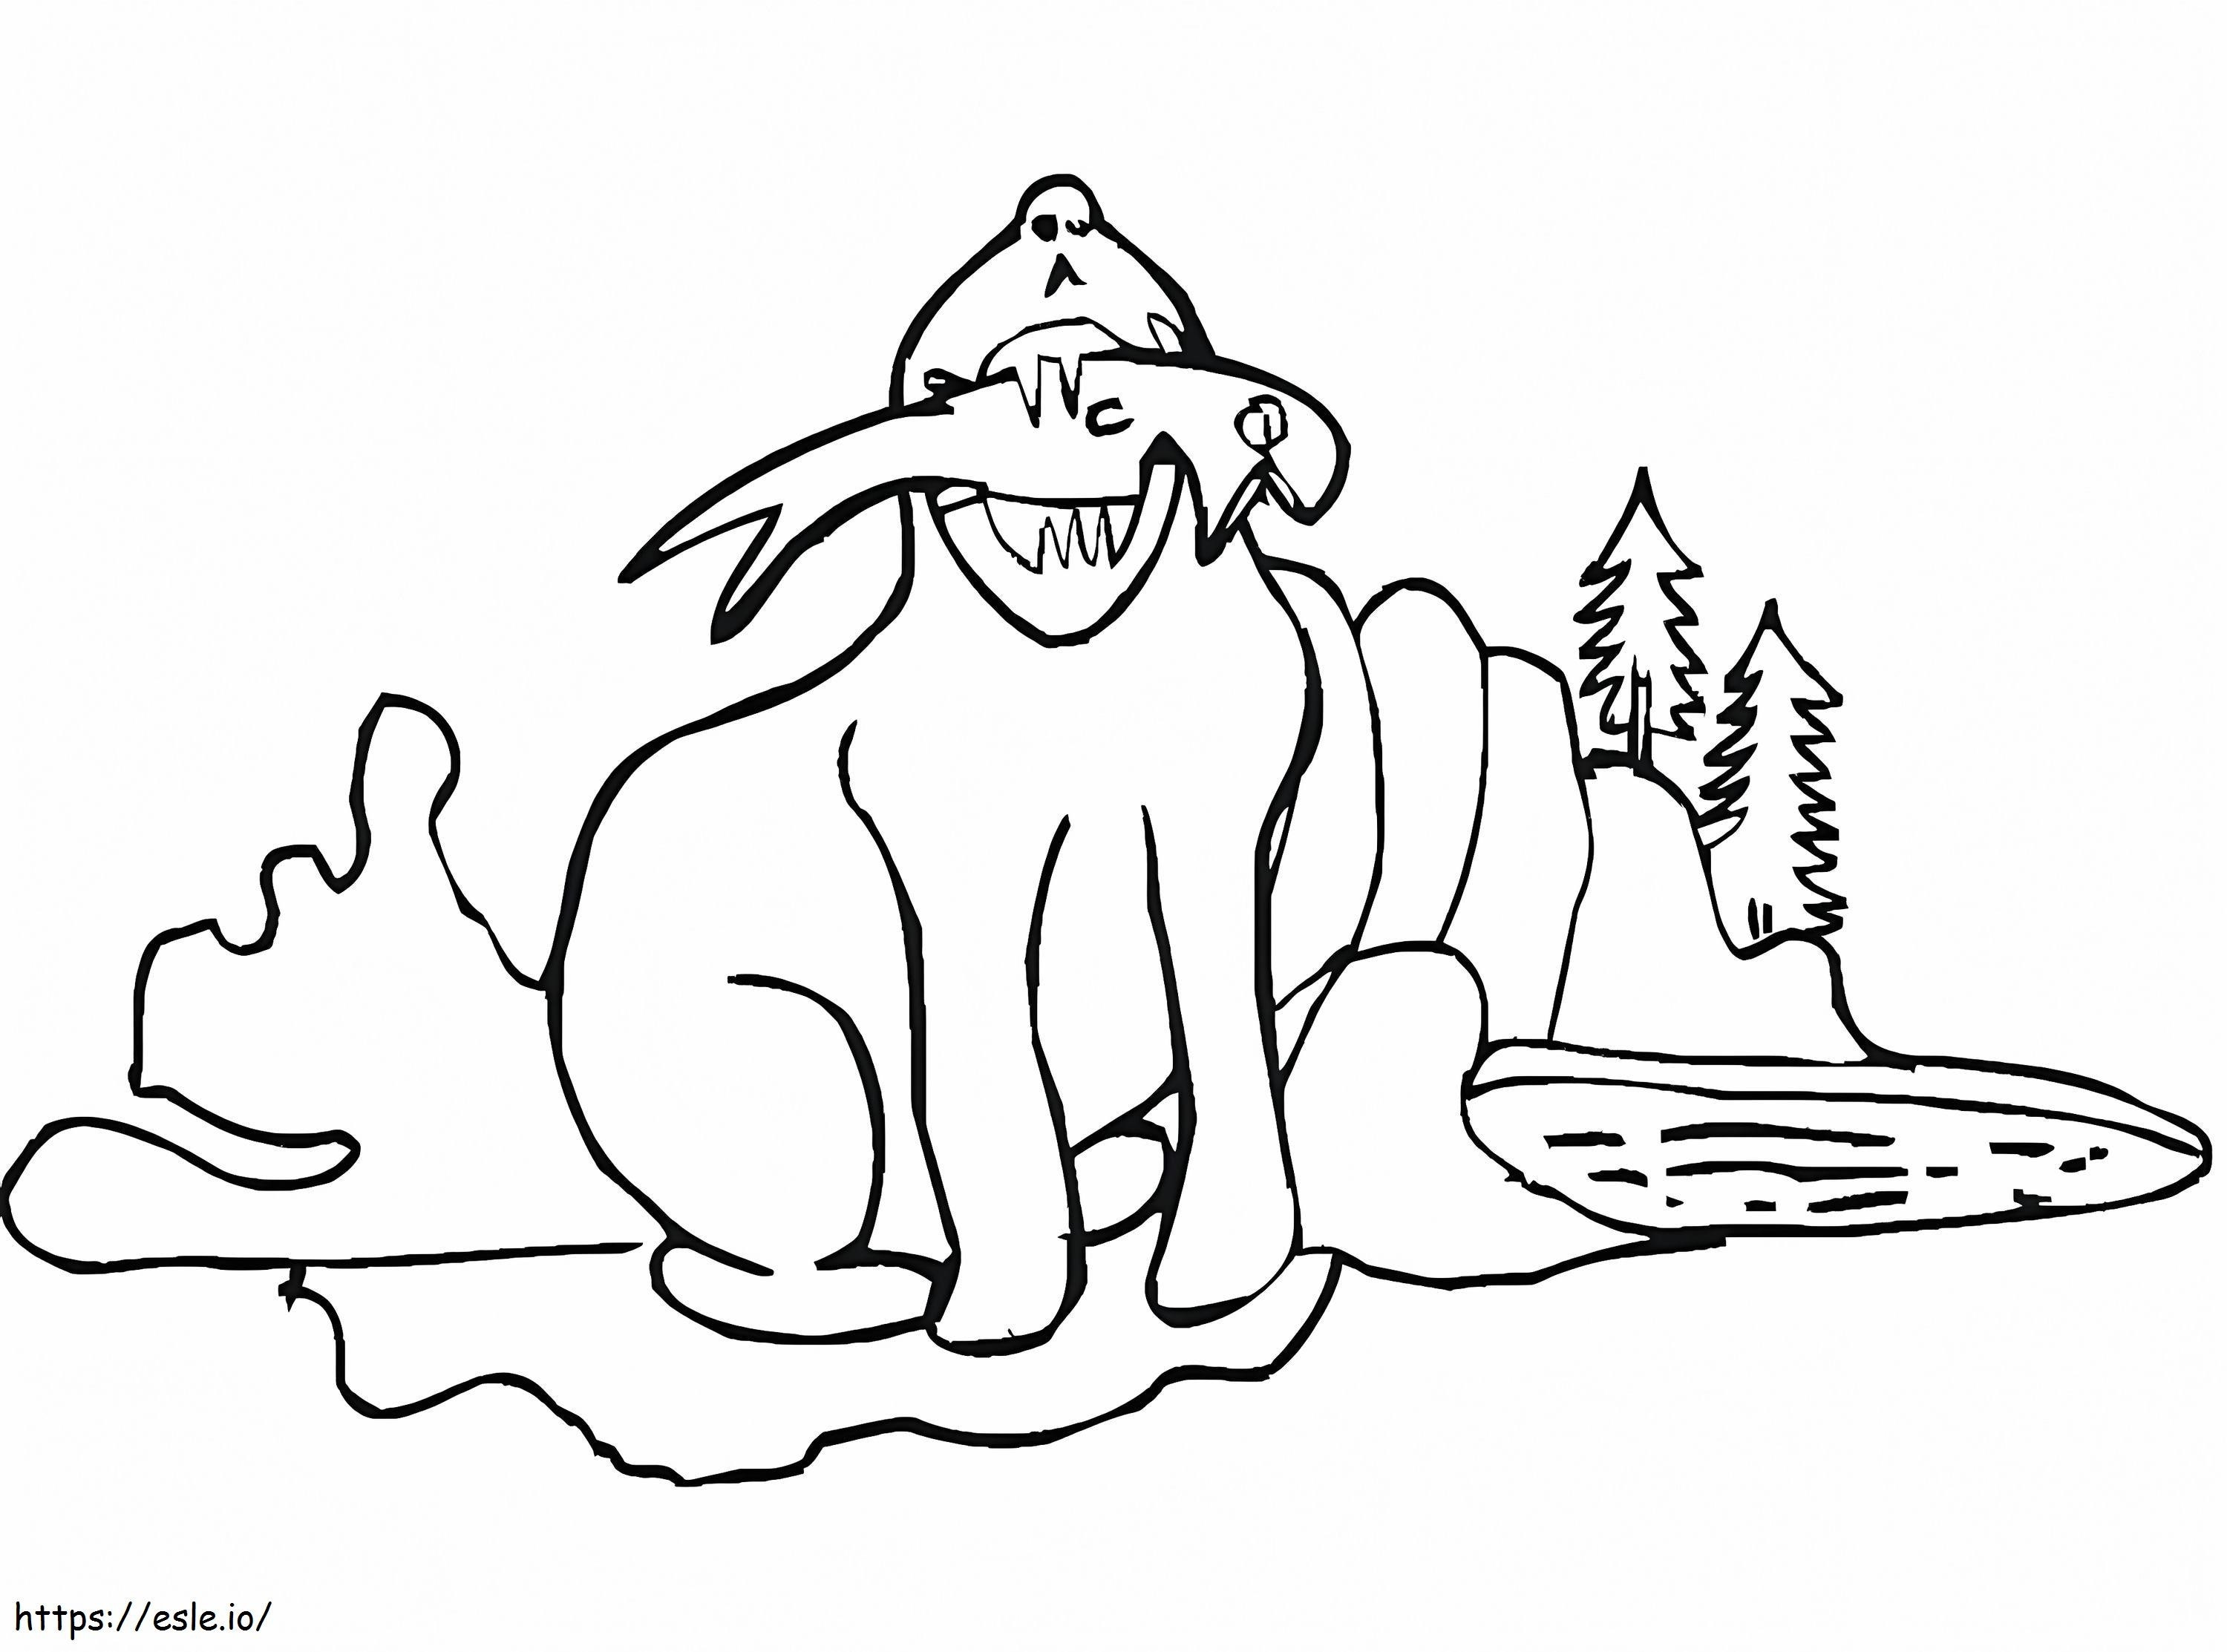 Seal Catching Fish coloring page